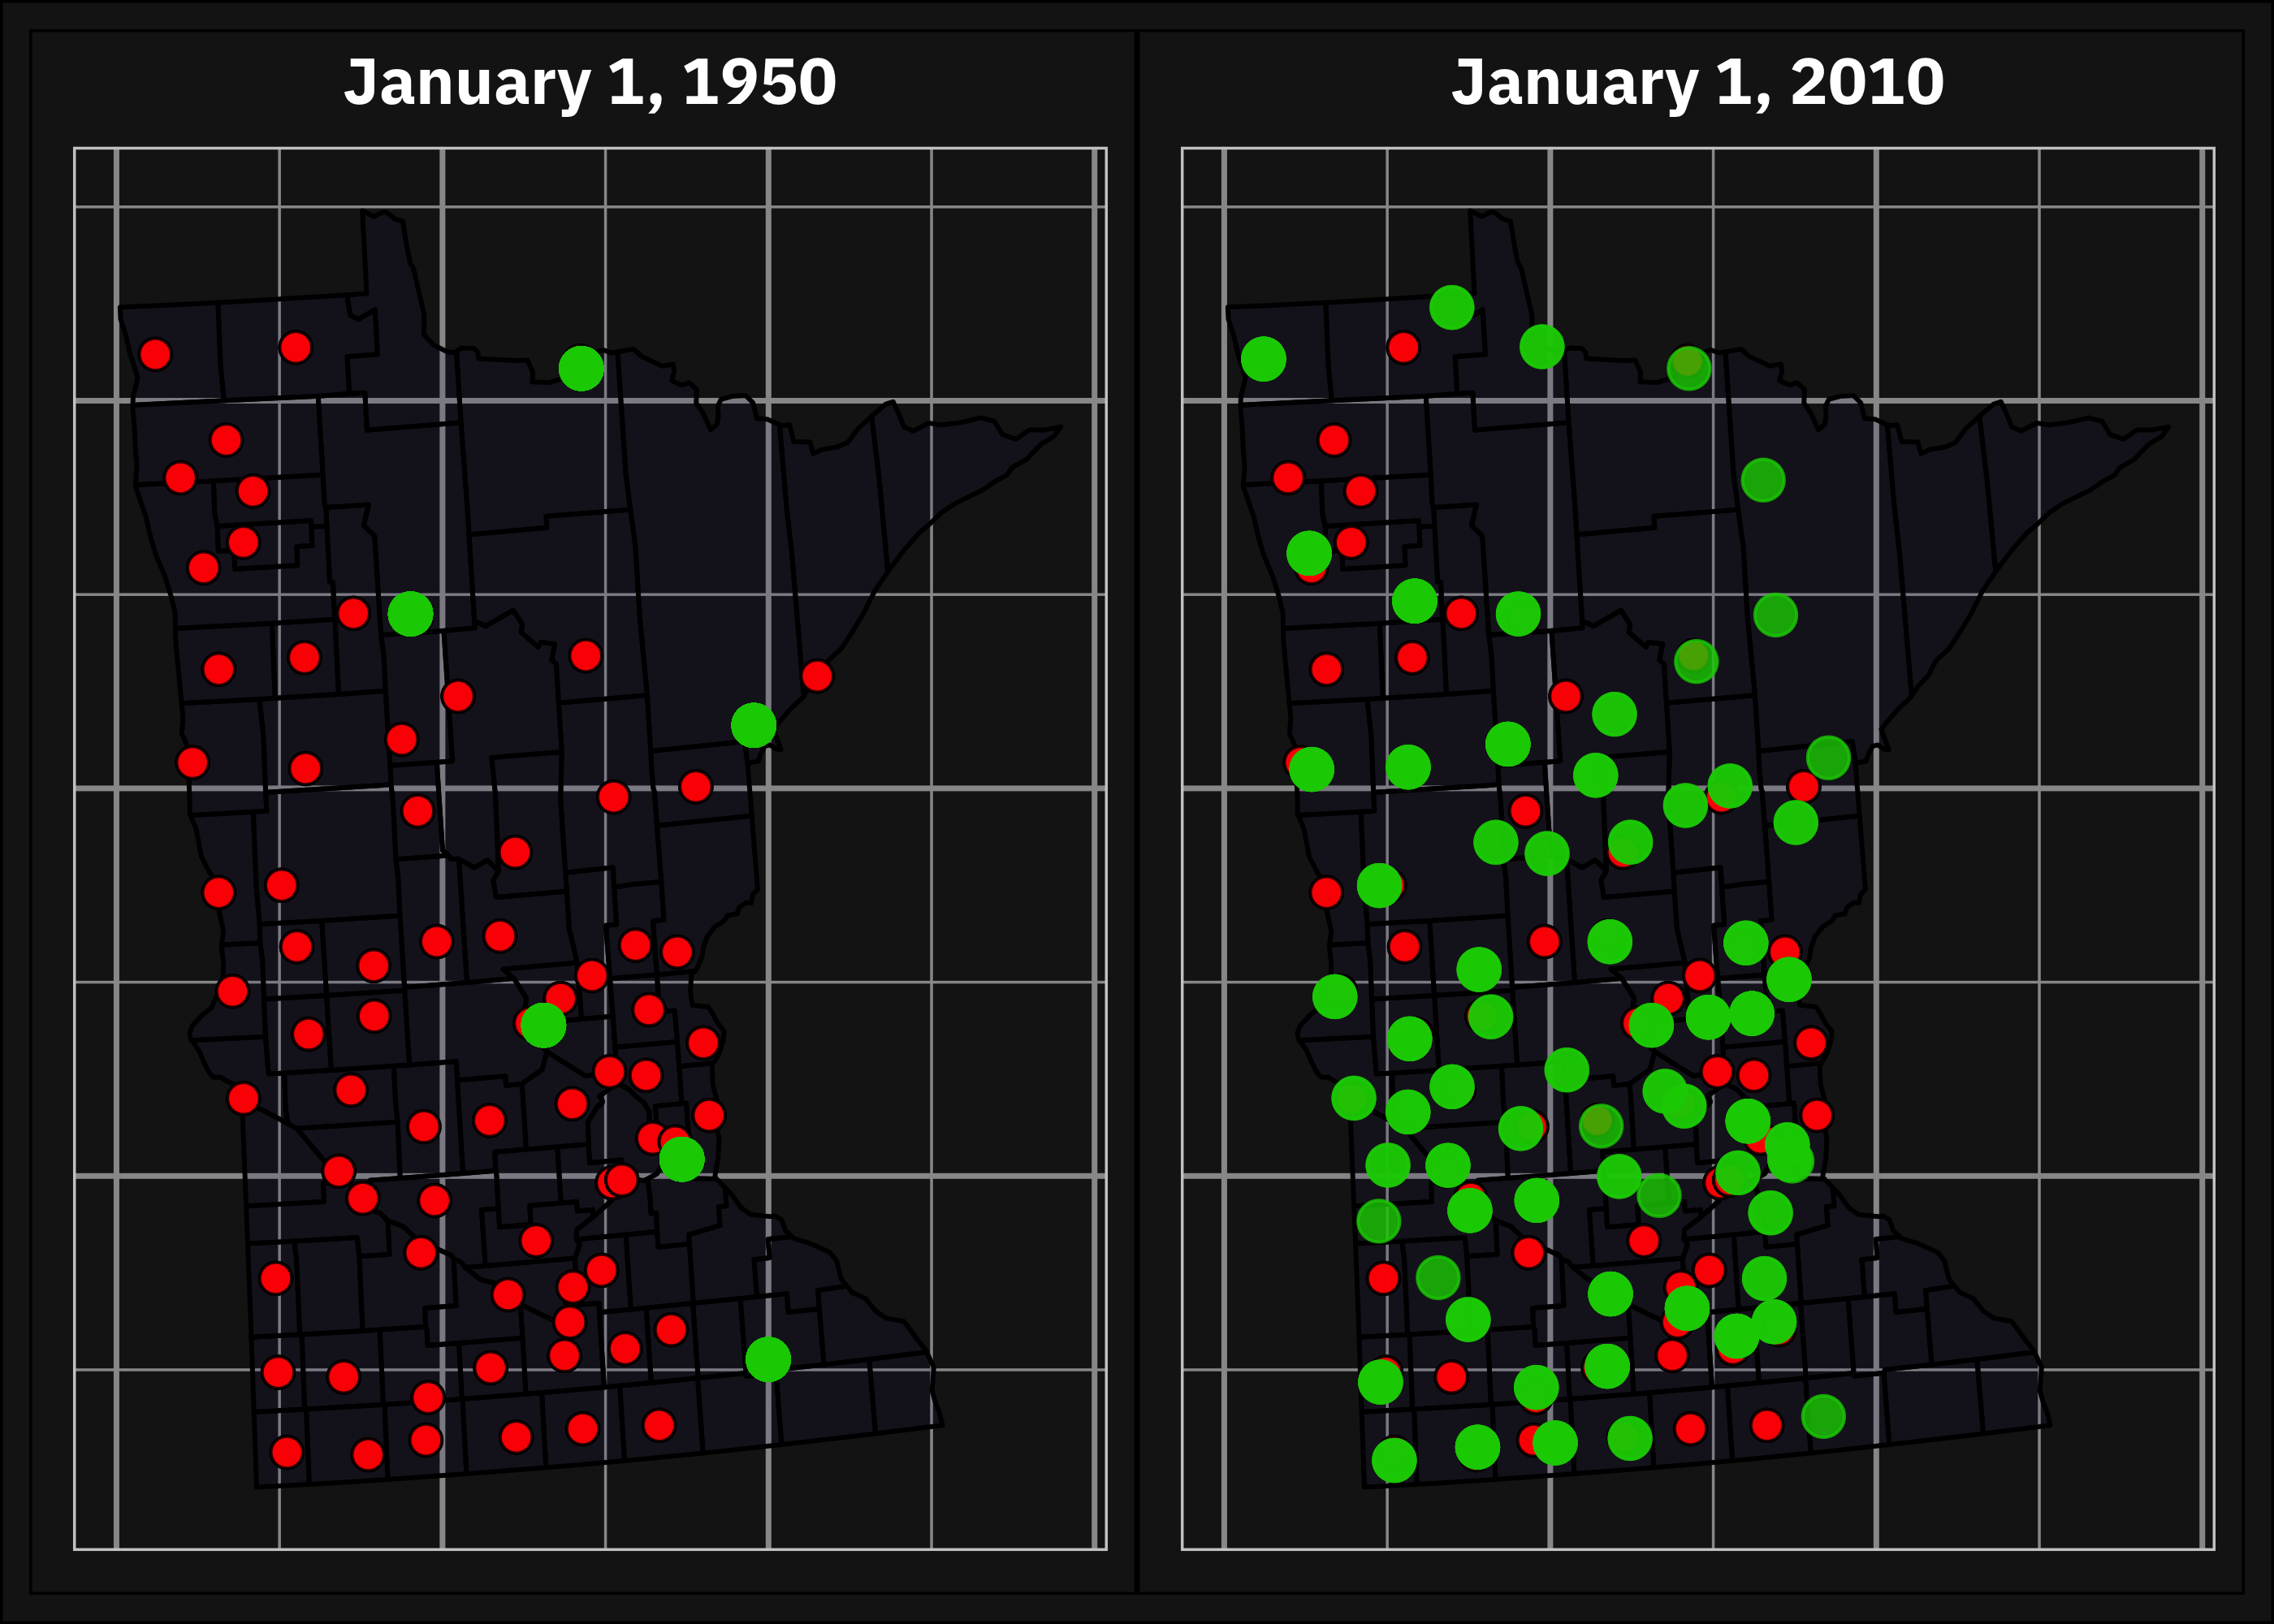 Figure 1: Geographical location of the weather stations (green) included in the historical dataset and the counties (red) of Minnesota in 1950 and 2010.